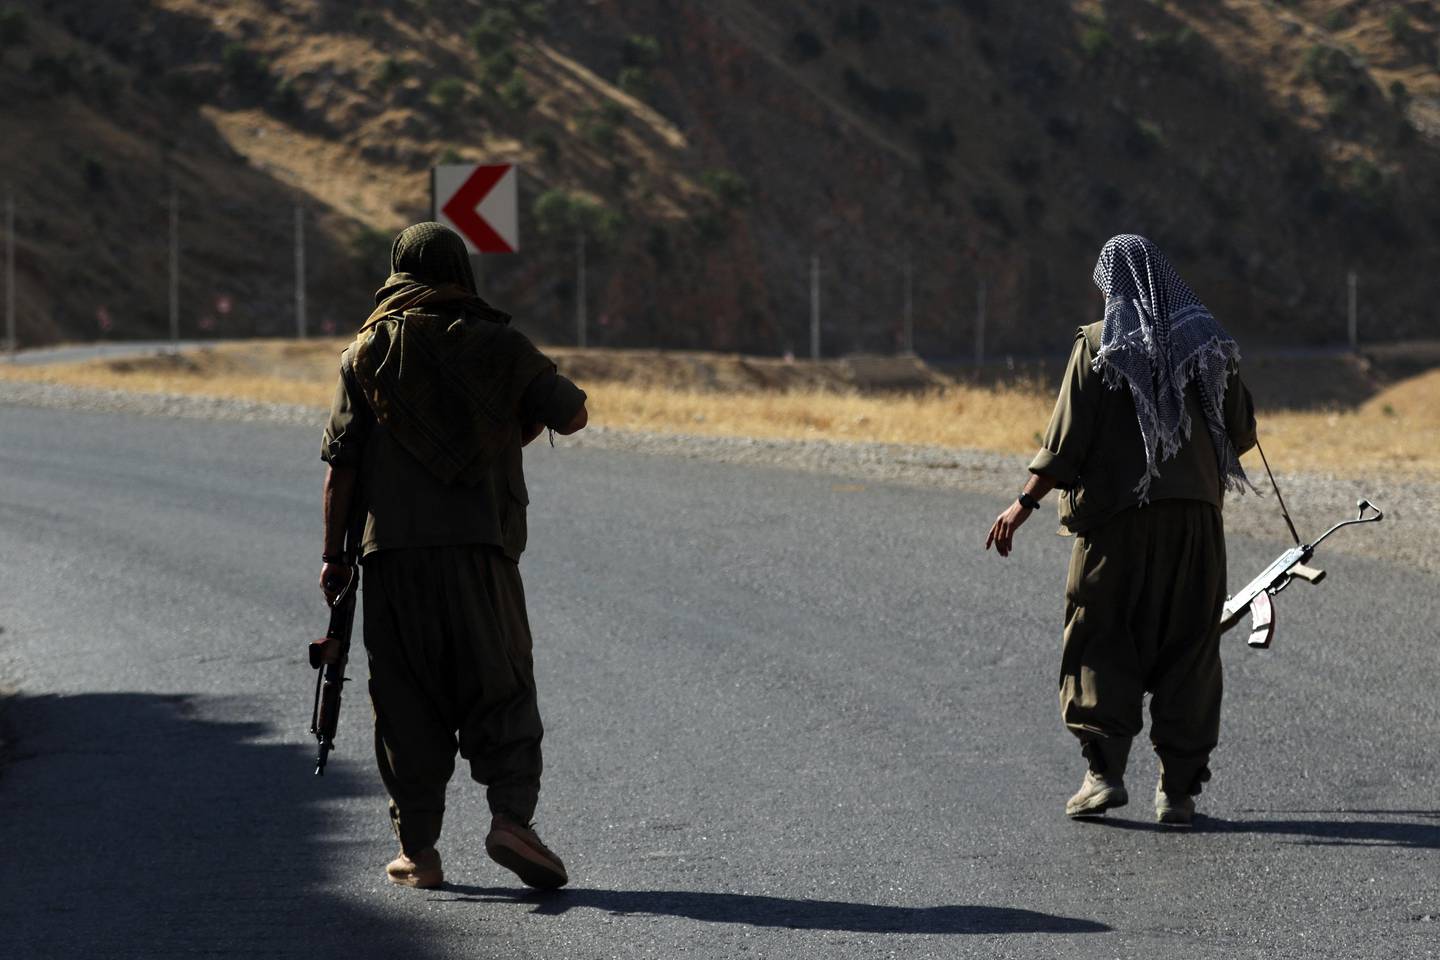 A member of the PKK carries an automatic rifle on a road in the Qandil Mountains, in northern Iraq. AFP